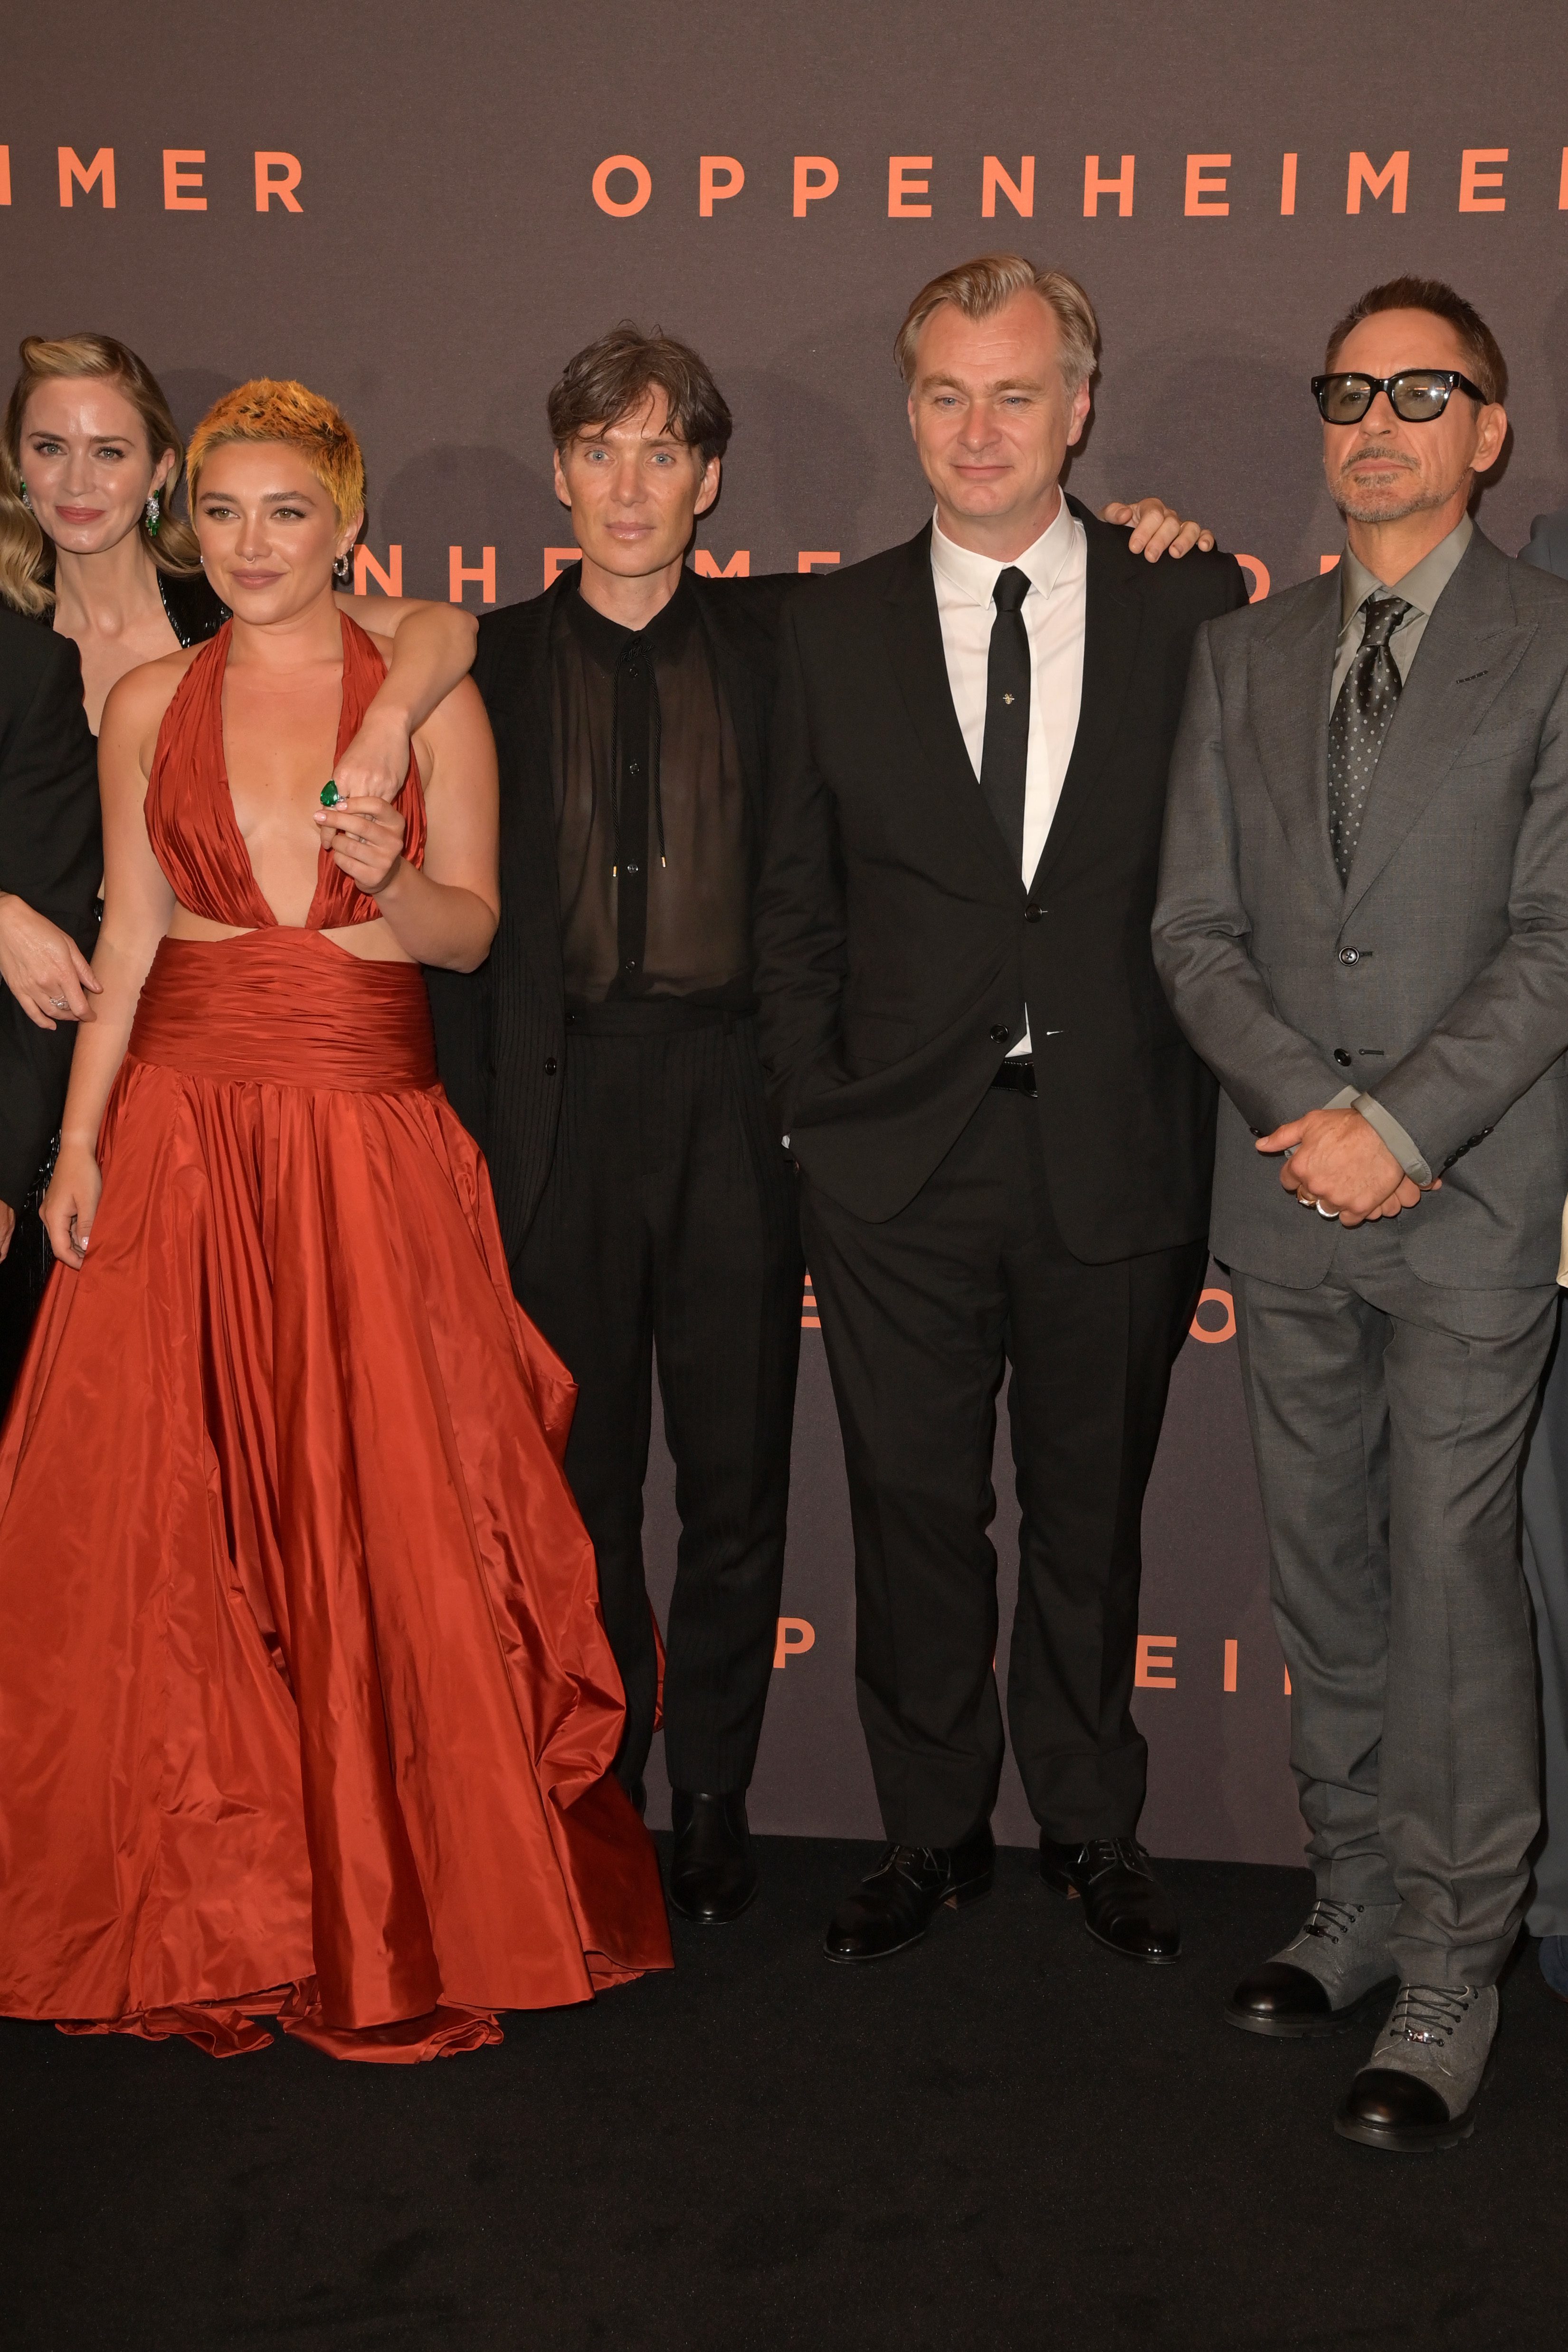 Close-up of cast members and Christopher at a media event